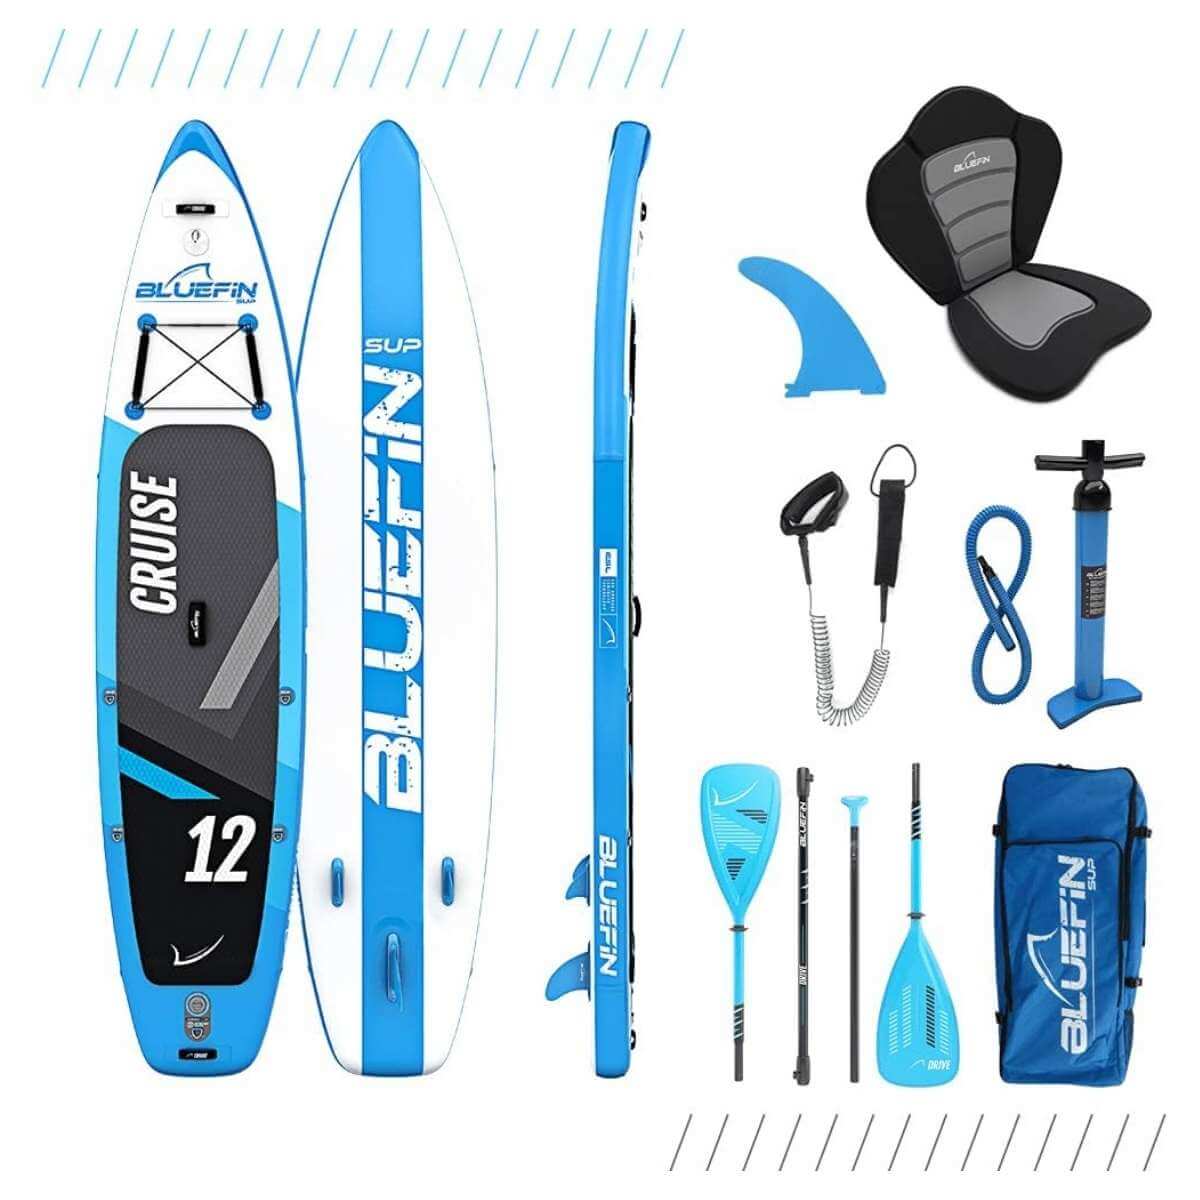 Bluefin Cruise SUP Package